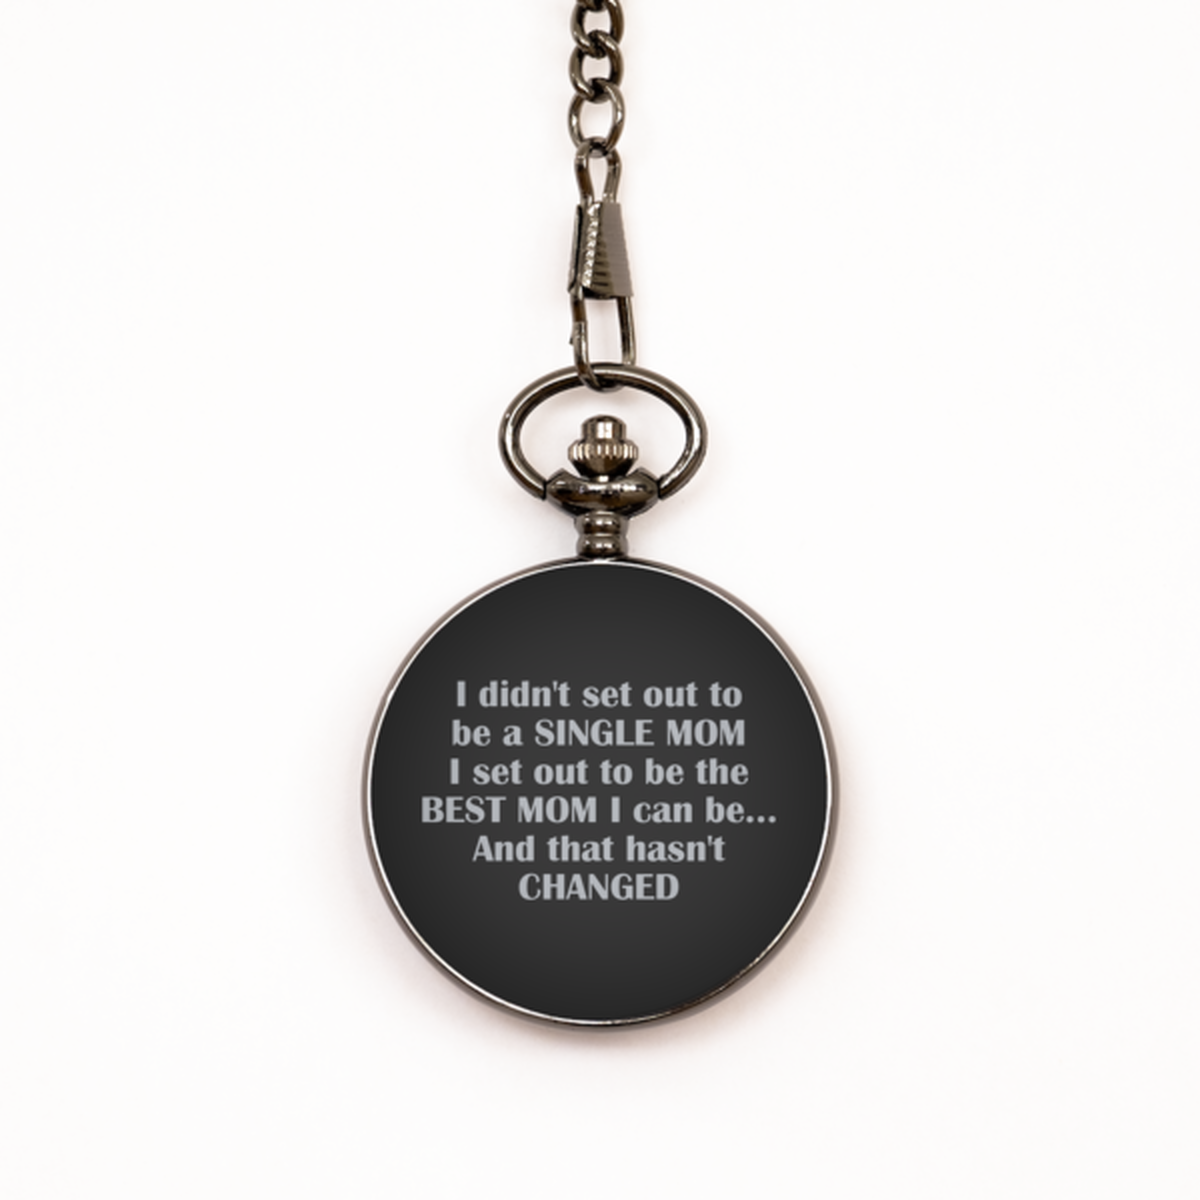 To My Single Mom Black Pocket Watch, To Be The Best Mom, Mothers Day Gifts For Single Mom From Friends, Birthday Gifts For Women